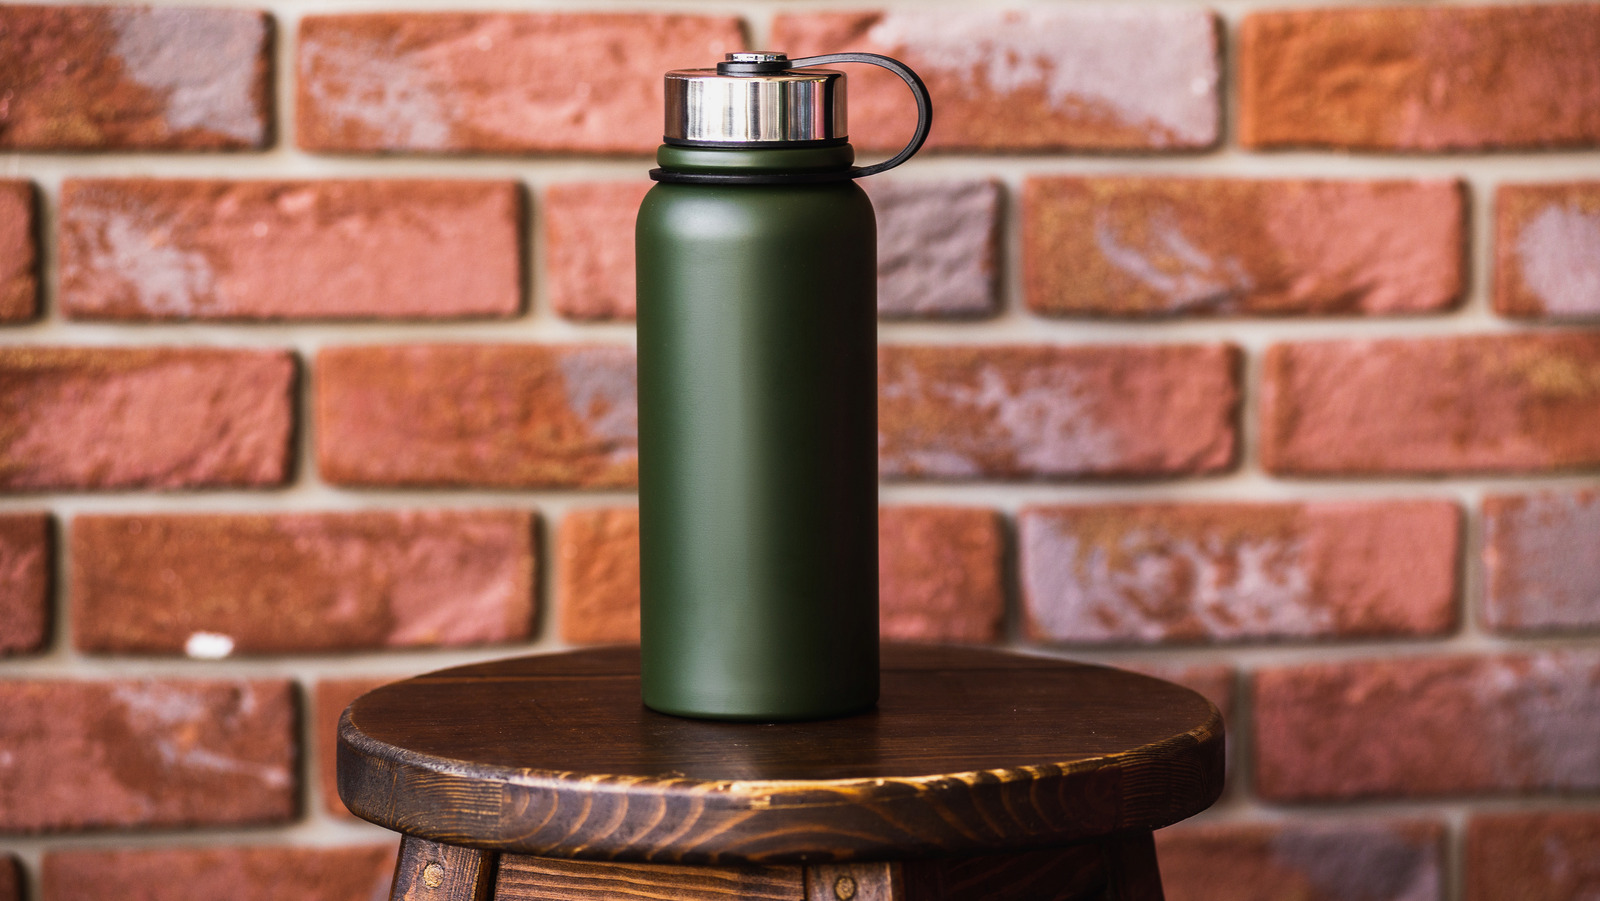 https://www.thedailymeal.com/img/gallery/a-thermos-is-your-best-friend-when-it-comes-to-keeping-gravy-warm/l-intro-1700713875.jpg